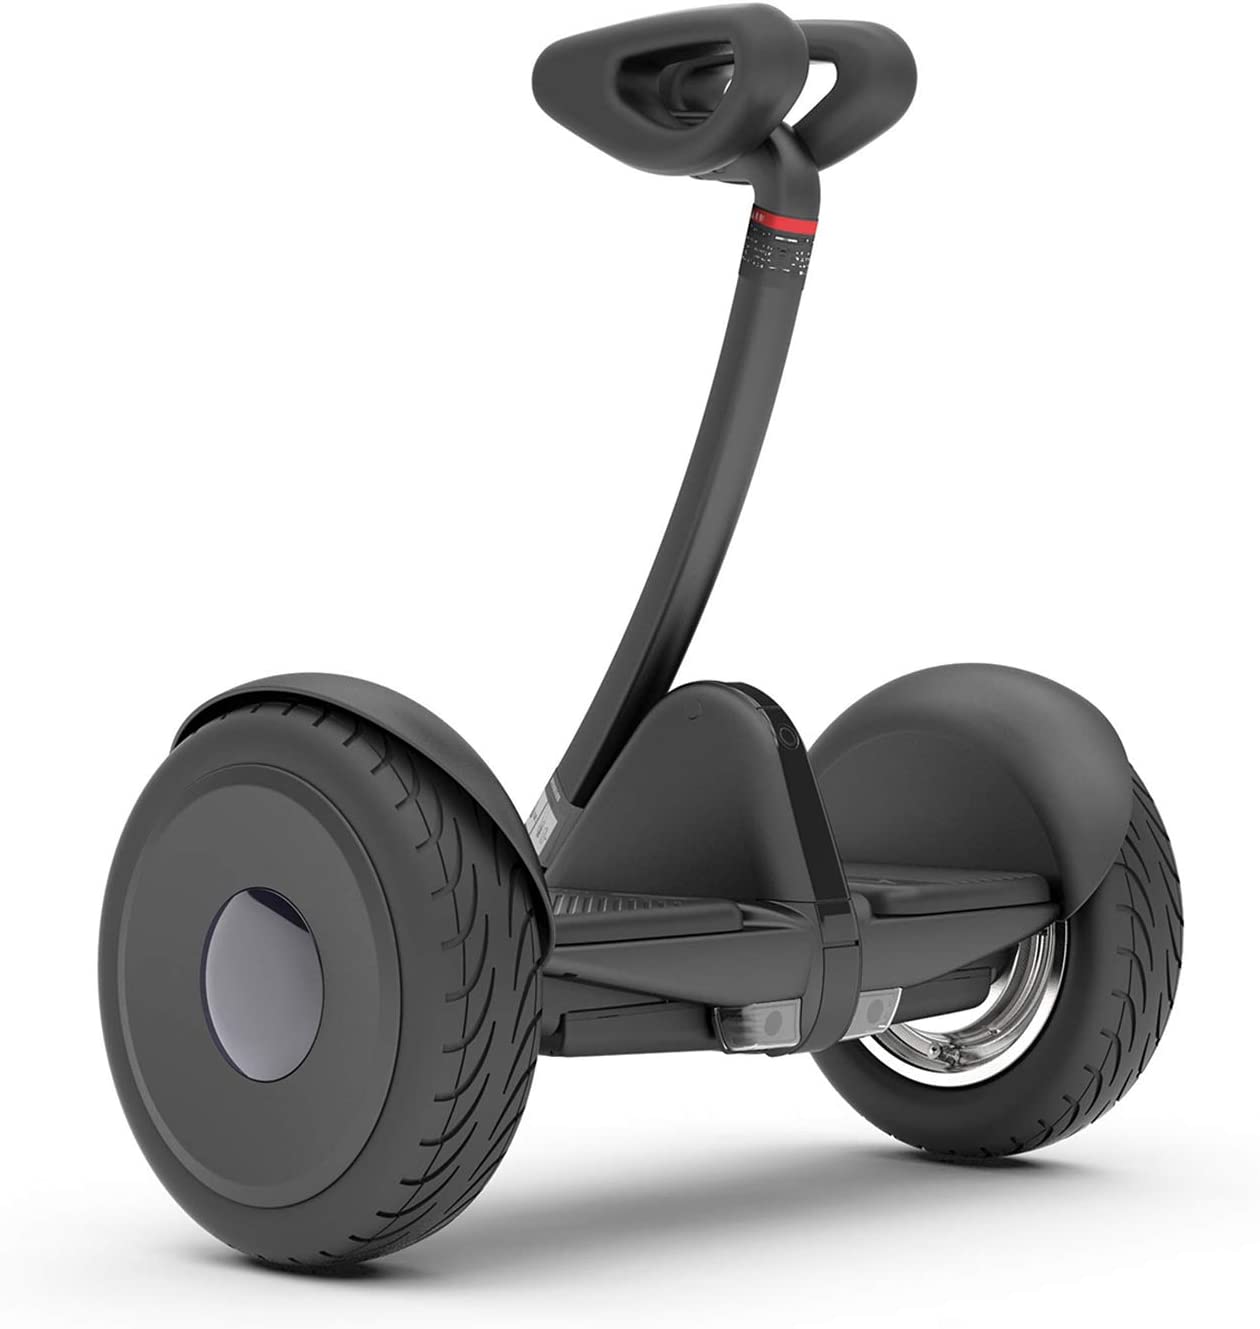 Segway Ninebot S Smart Self-Balancing Electric Scooter For $369.93 @ Amazon